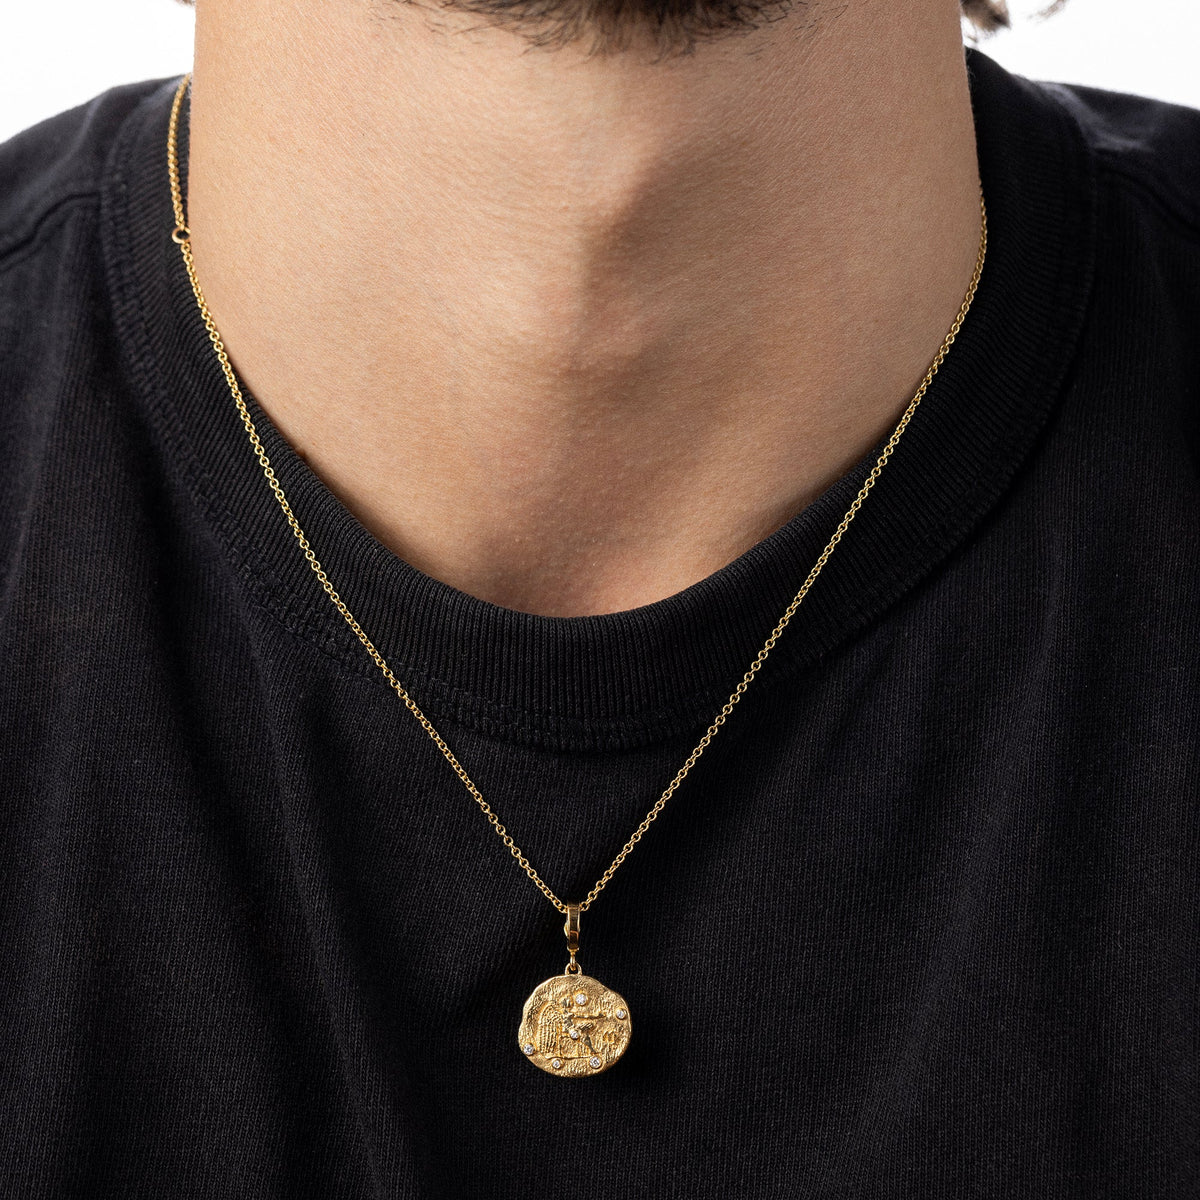 Of The Stars Gemini Small Coin Necklace